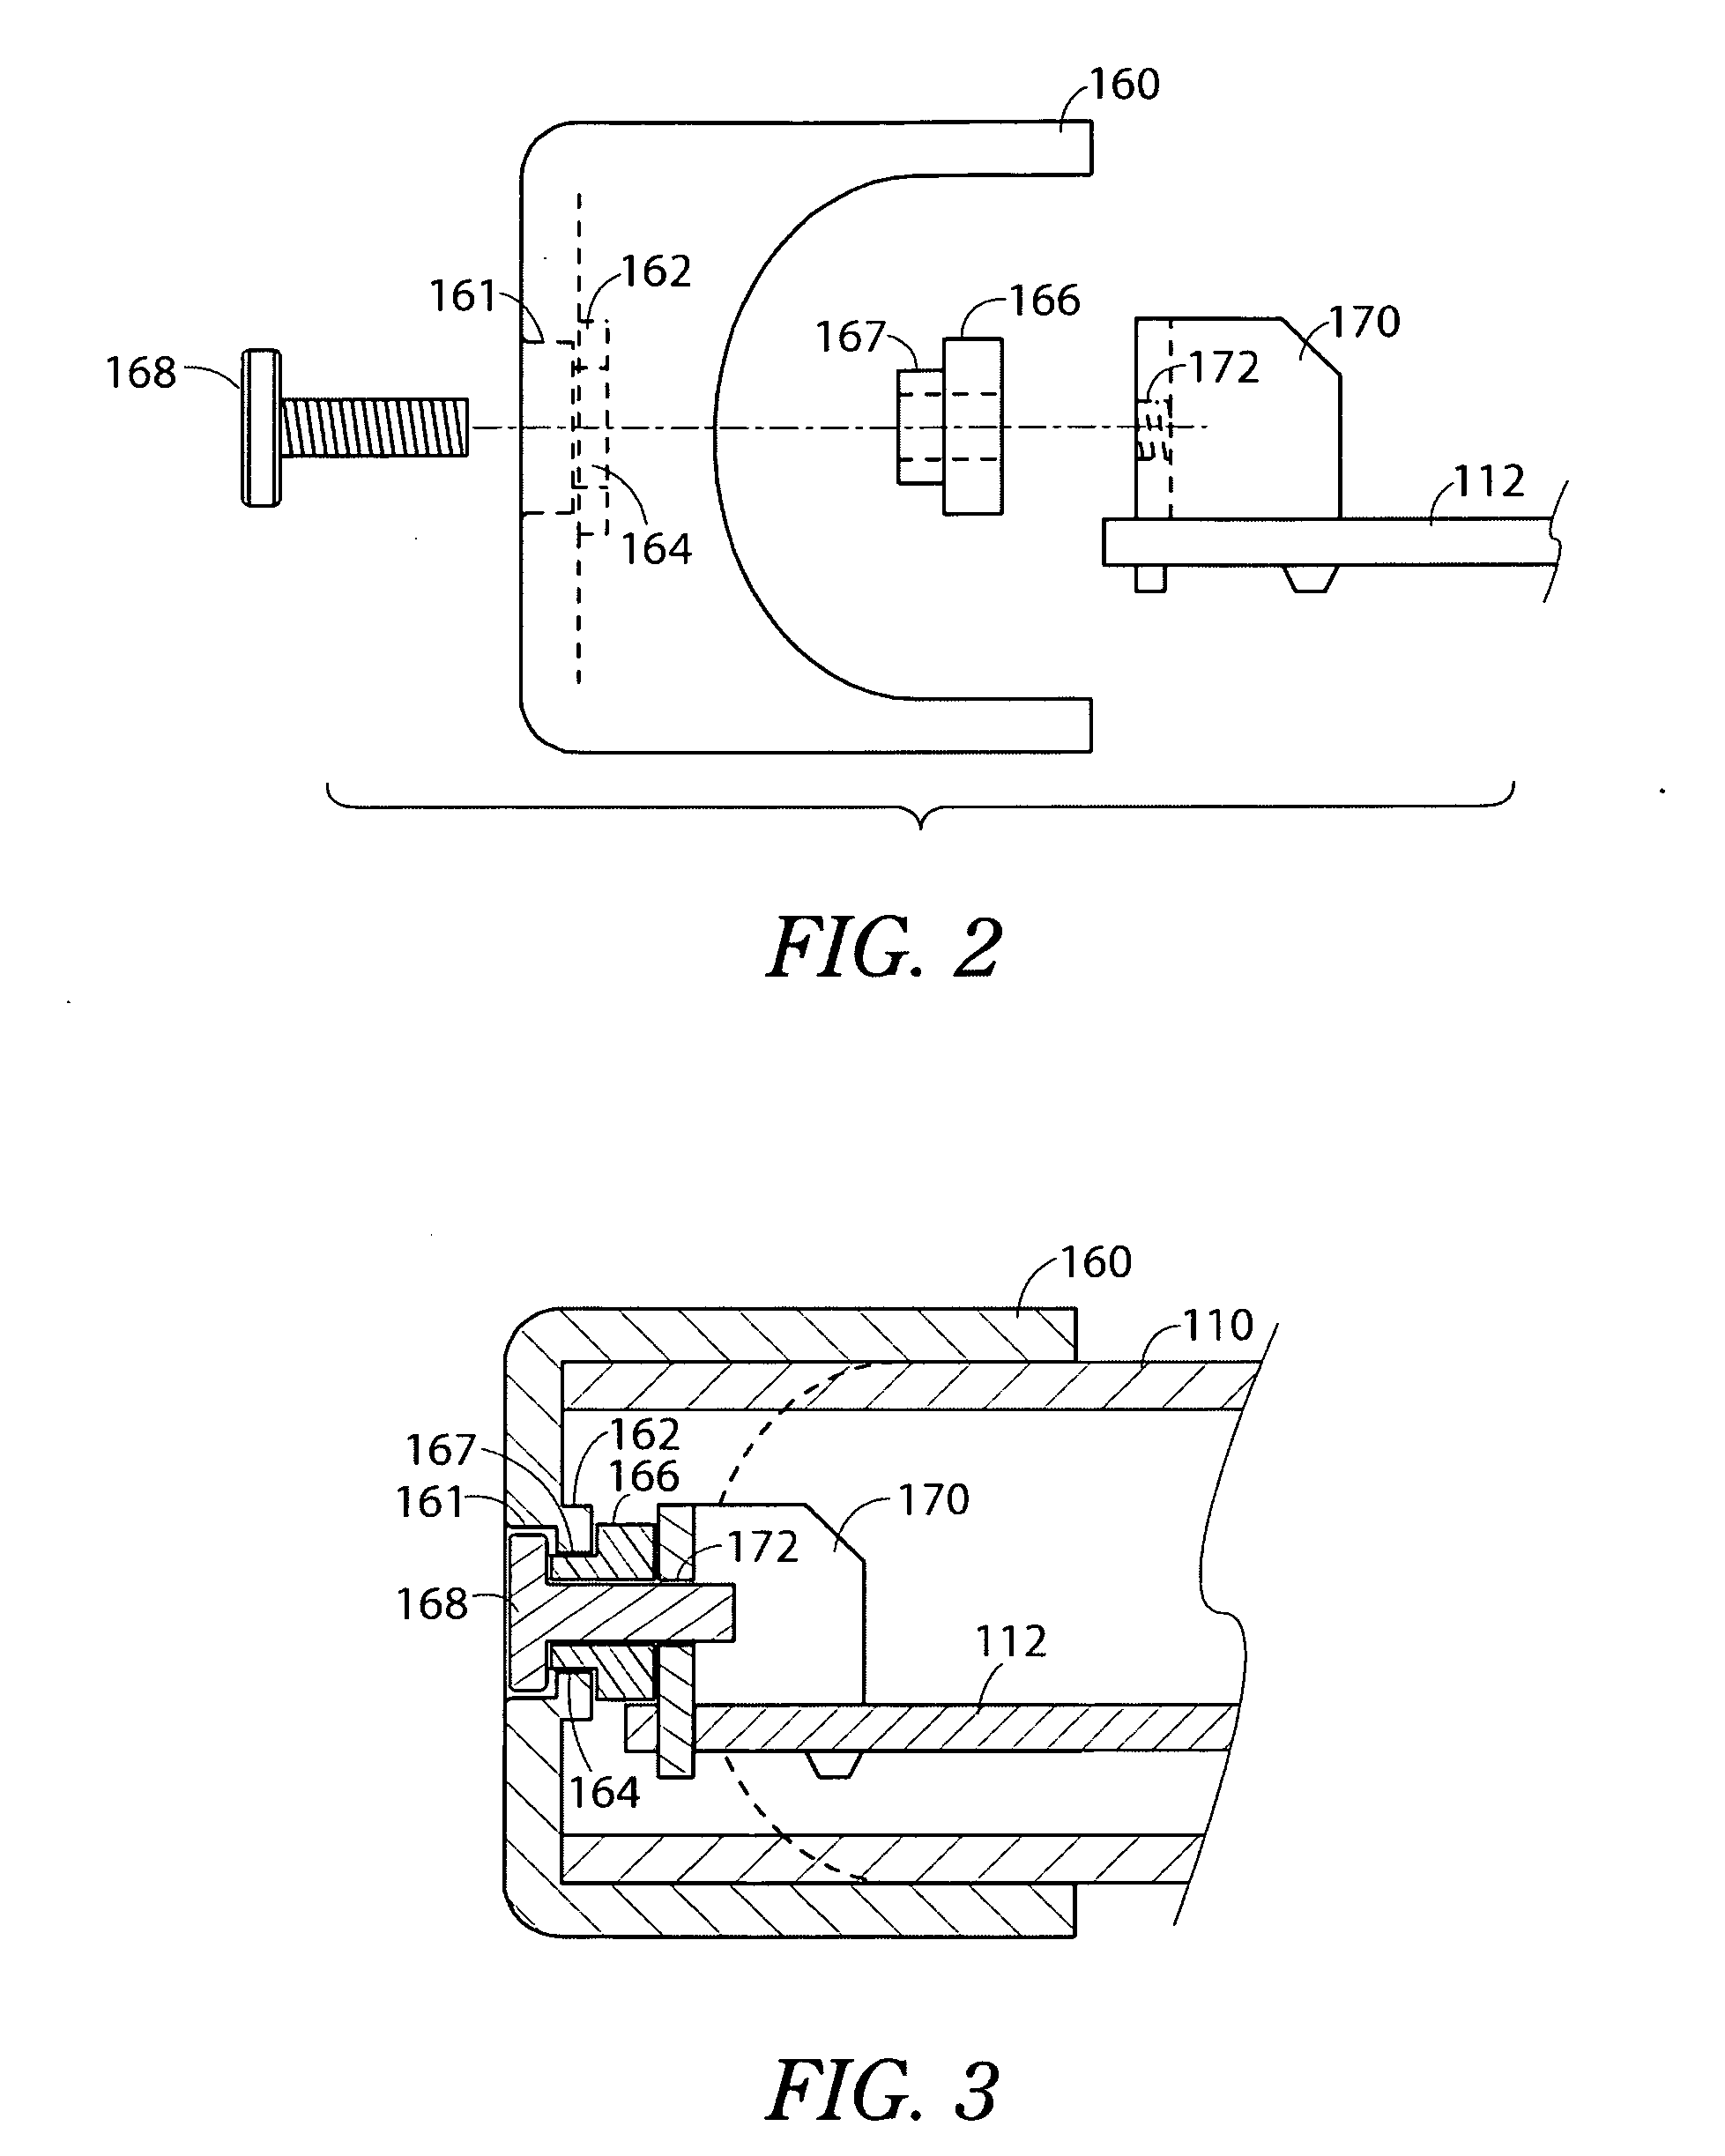 Apparatus to protect shock-sensitive devices and methods of assembly